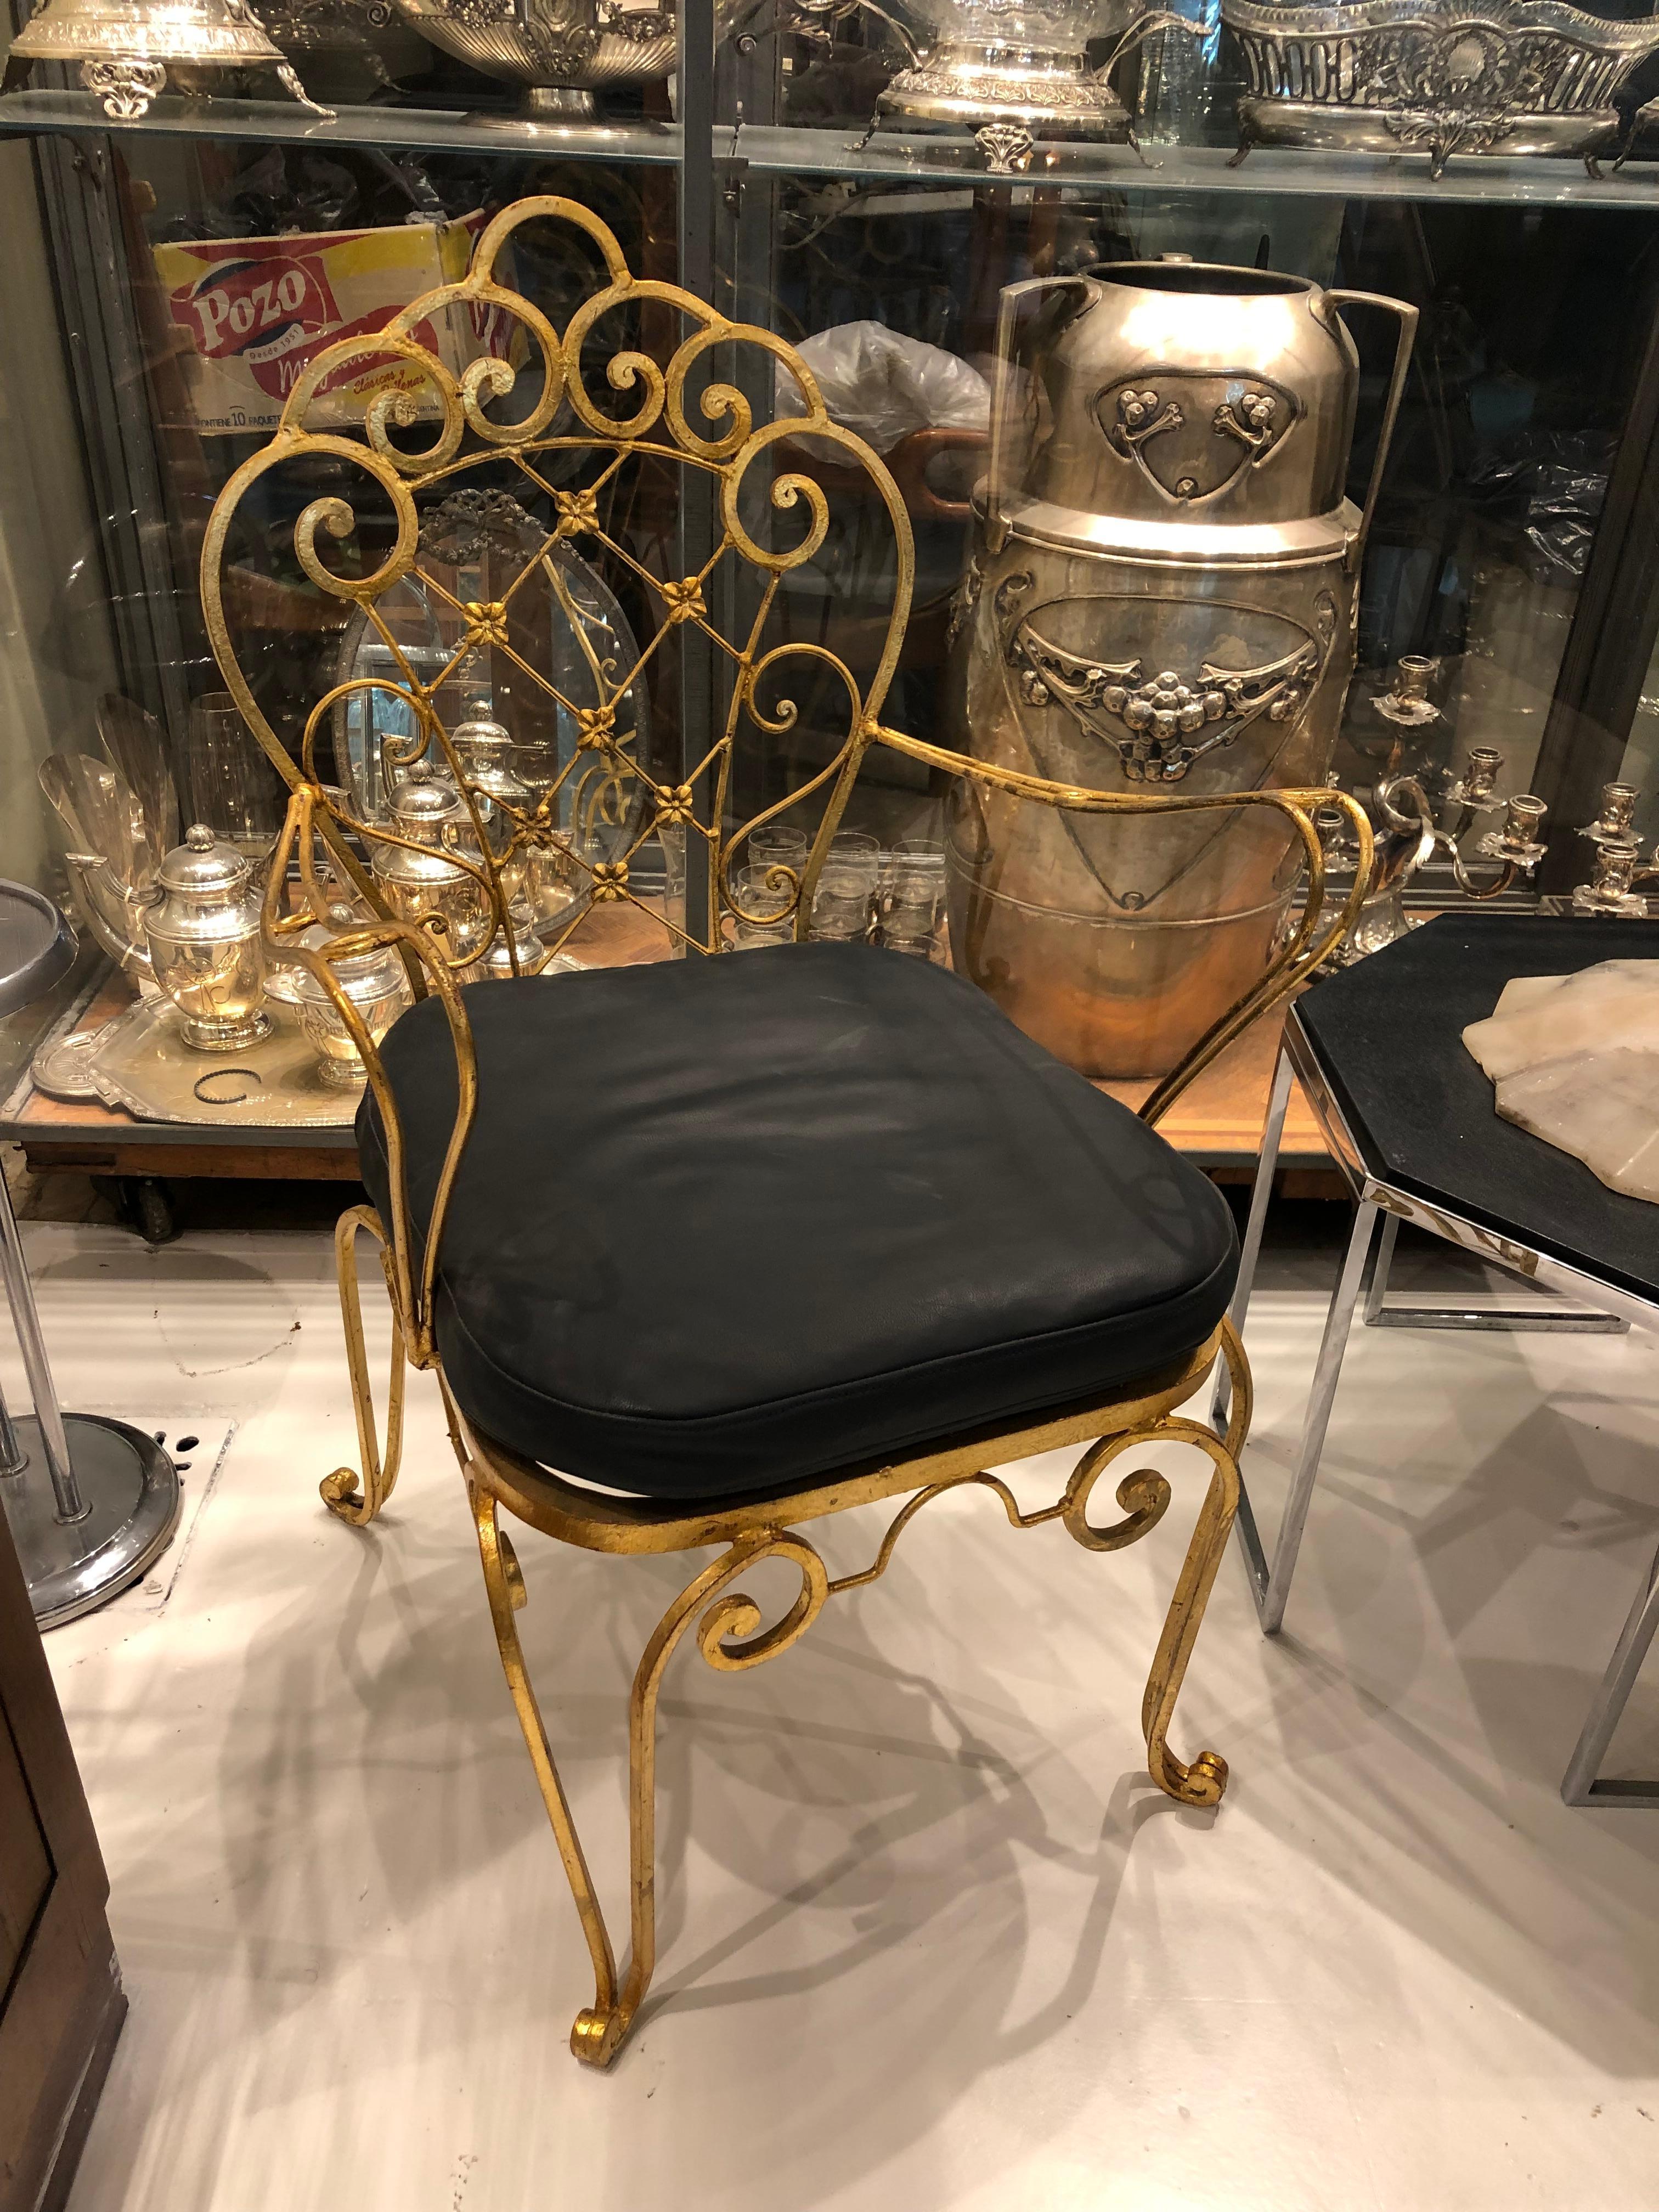 2 Armchairs
Iron on Gold leaf
We have specialized in the sale of Art Deco and Art Nouveau and Vintage styles since 1982. If you have any questions we are at your disposal.
Pushing the button that reads 'View All From Seller'. And you can see more